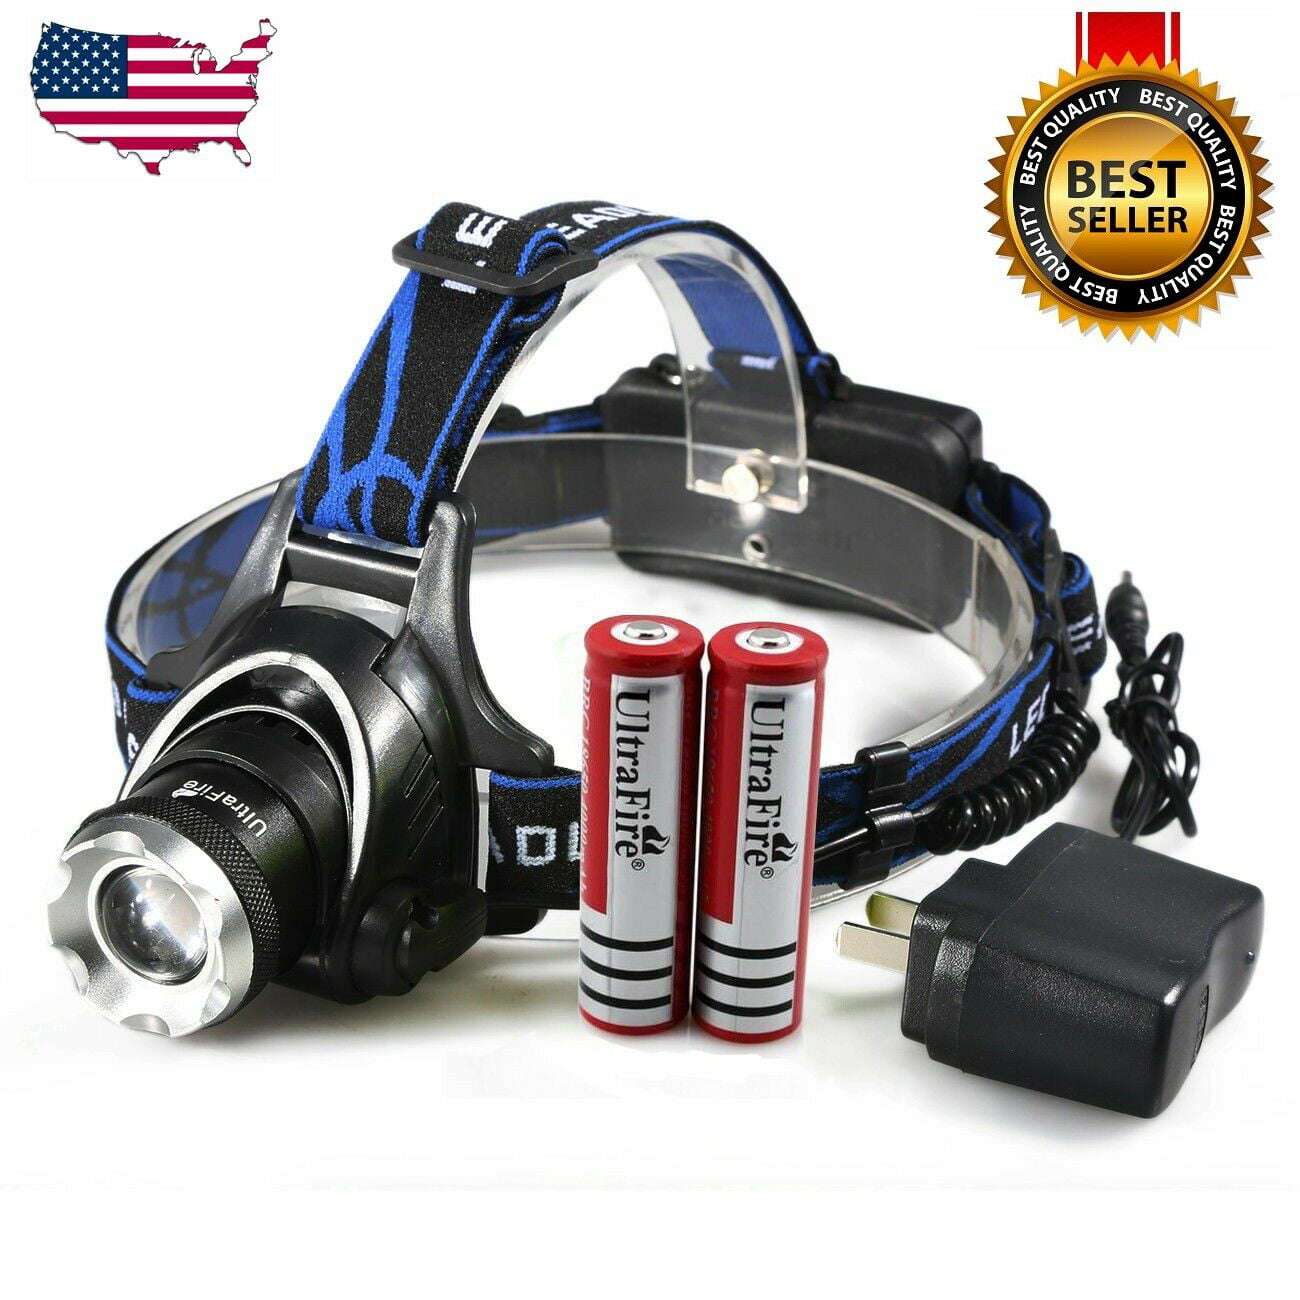 LOT 1-100 8000LM Rechargeable Head light T6 LED Tactical Headlamp Zoomable 18650 